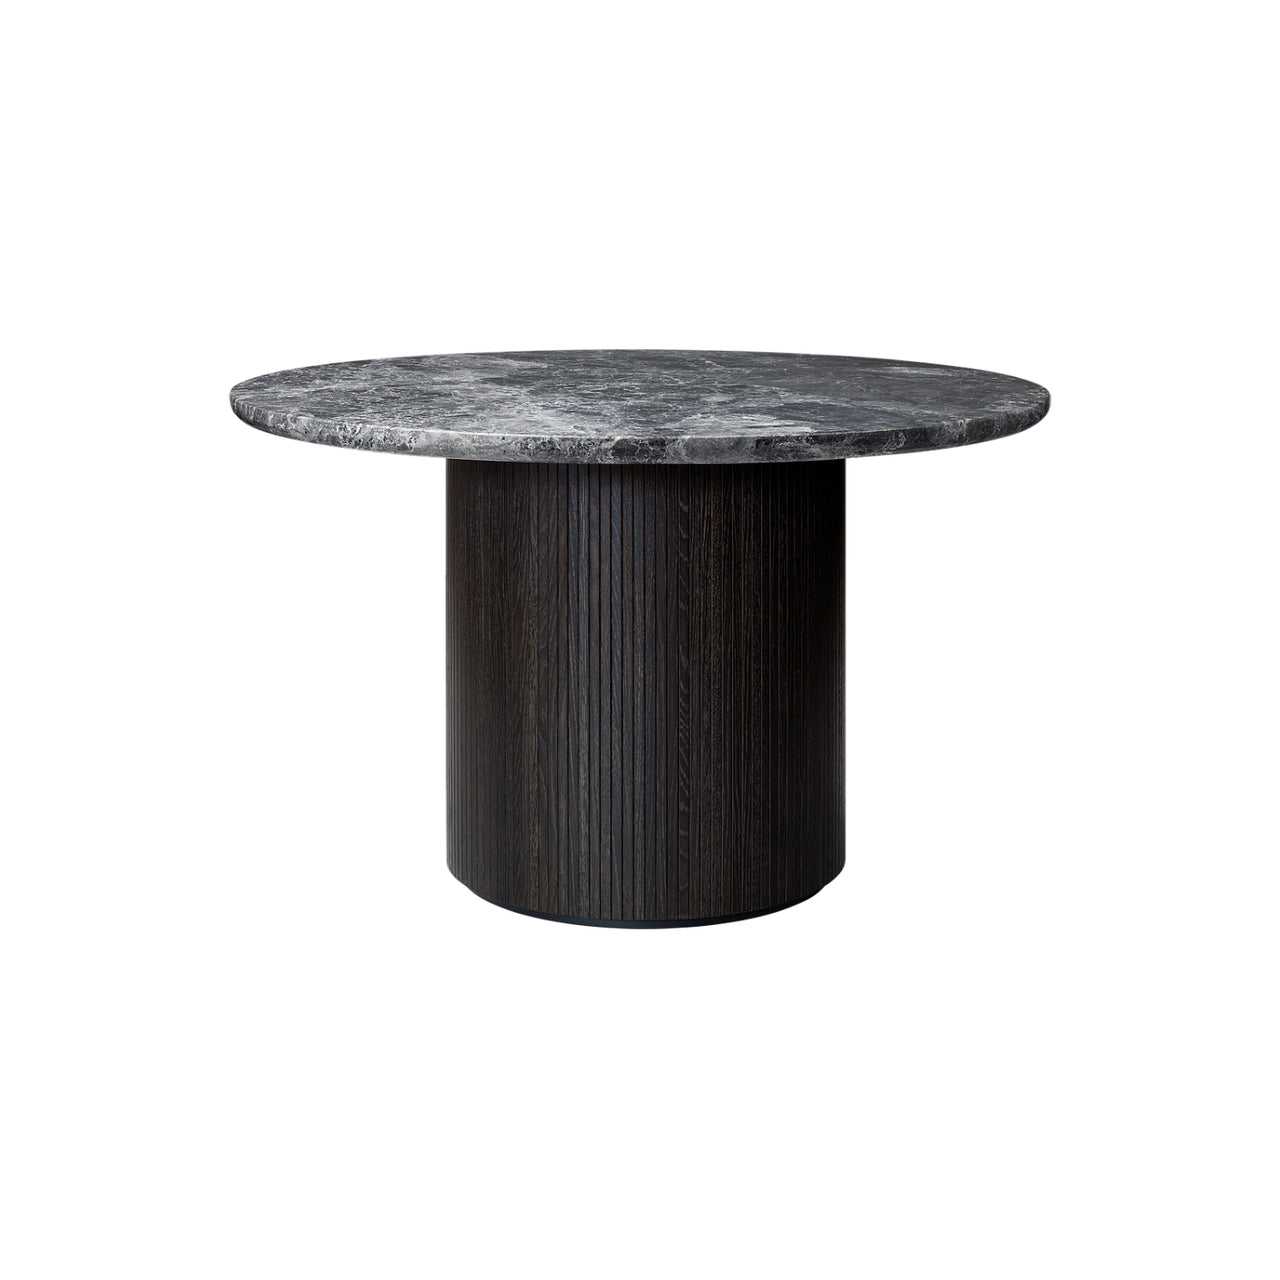 Moon Round Dining Table: Marble Top + Small - 47.2